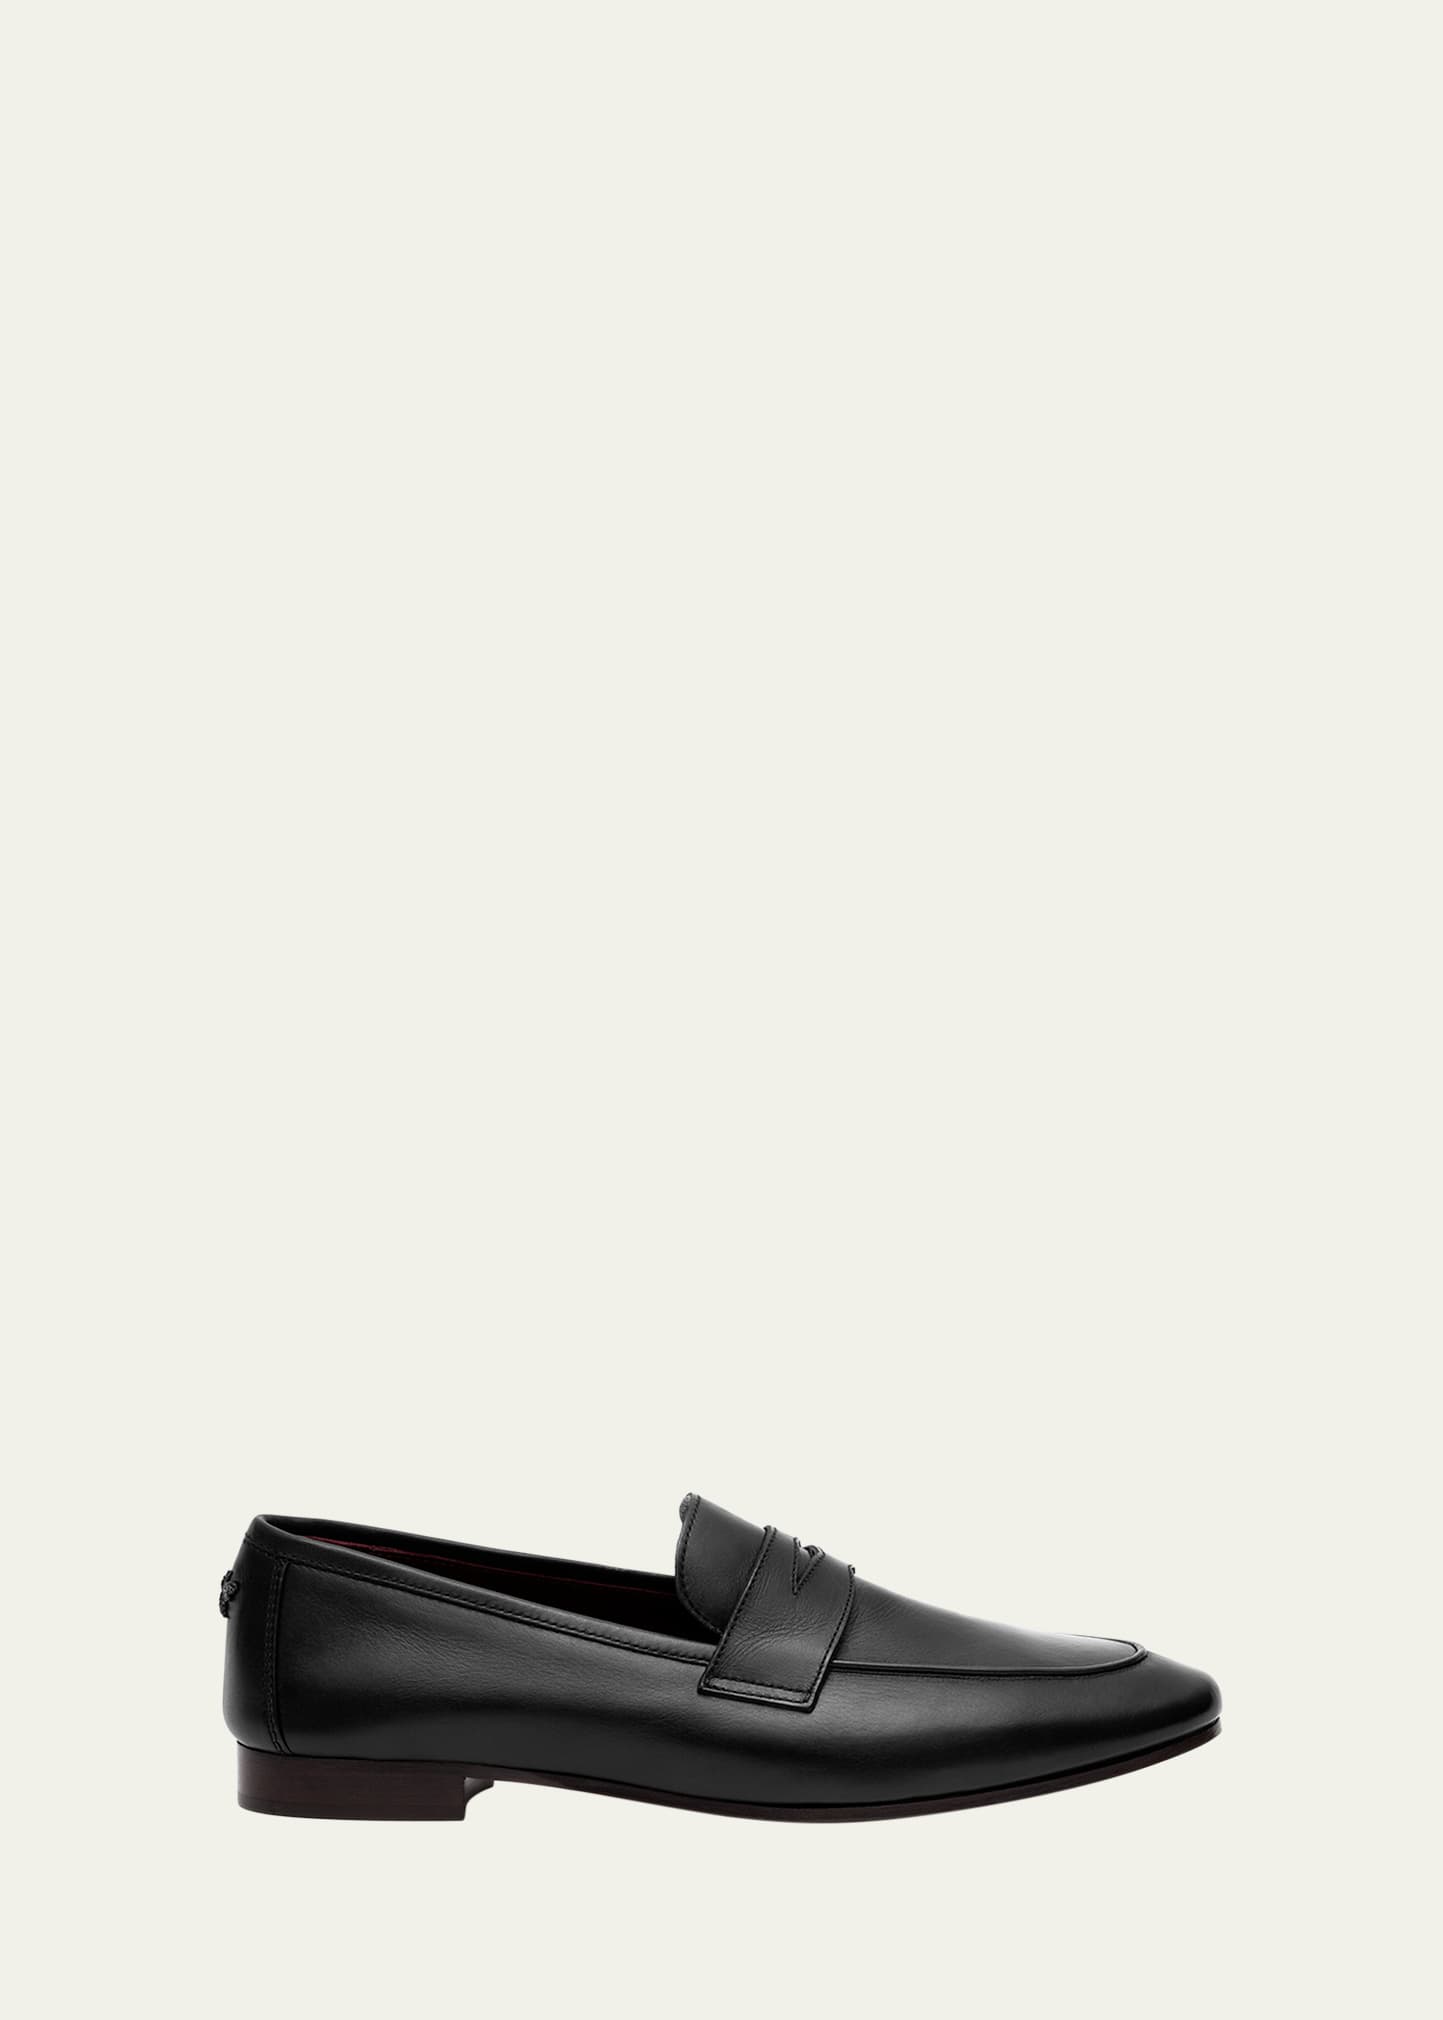 Bougeotte Flaneur Leather Flat Penny Loafers